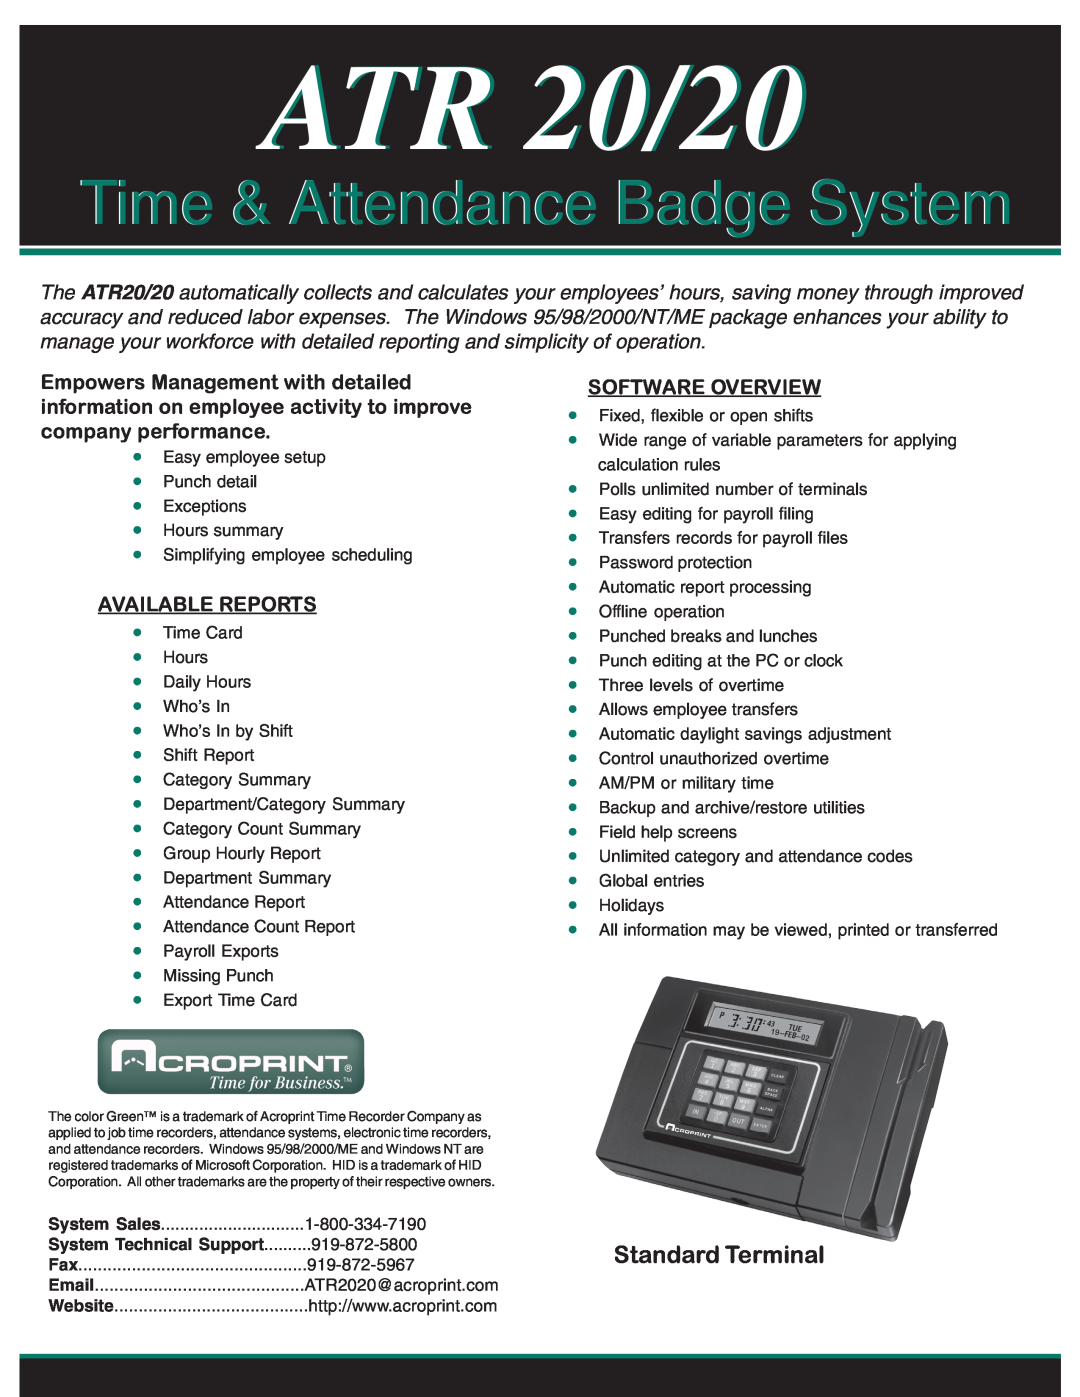 Acroprint ATR20/20-5, ATR20/20-4 manual Available Reports, Software Overview, ATR 20/20, Time & Attendance Badge System 